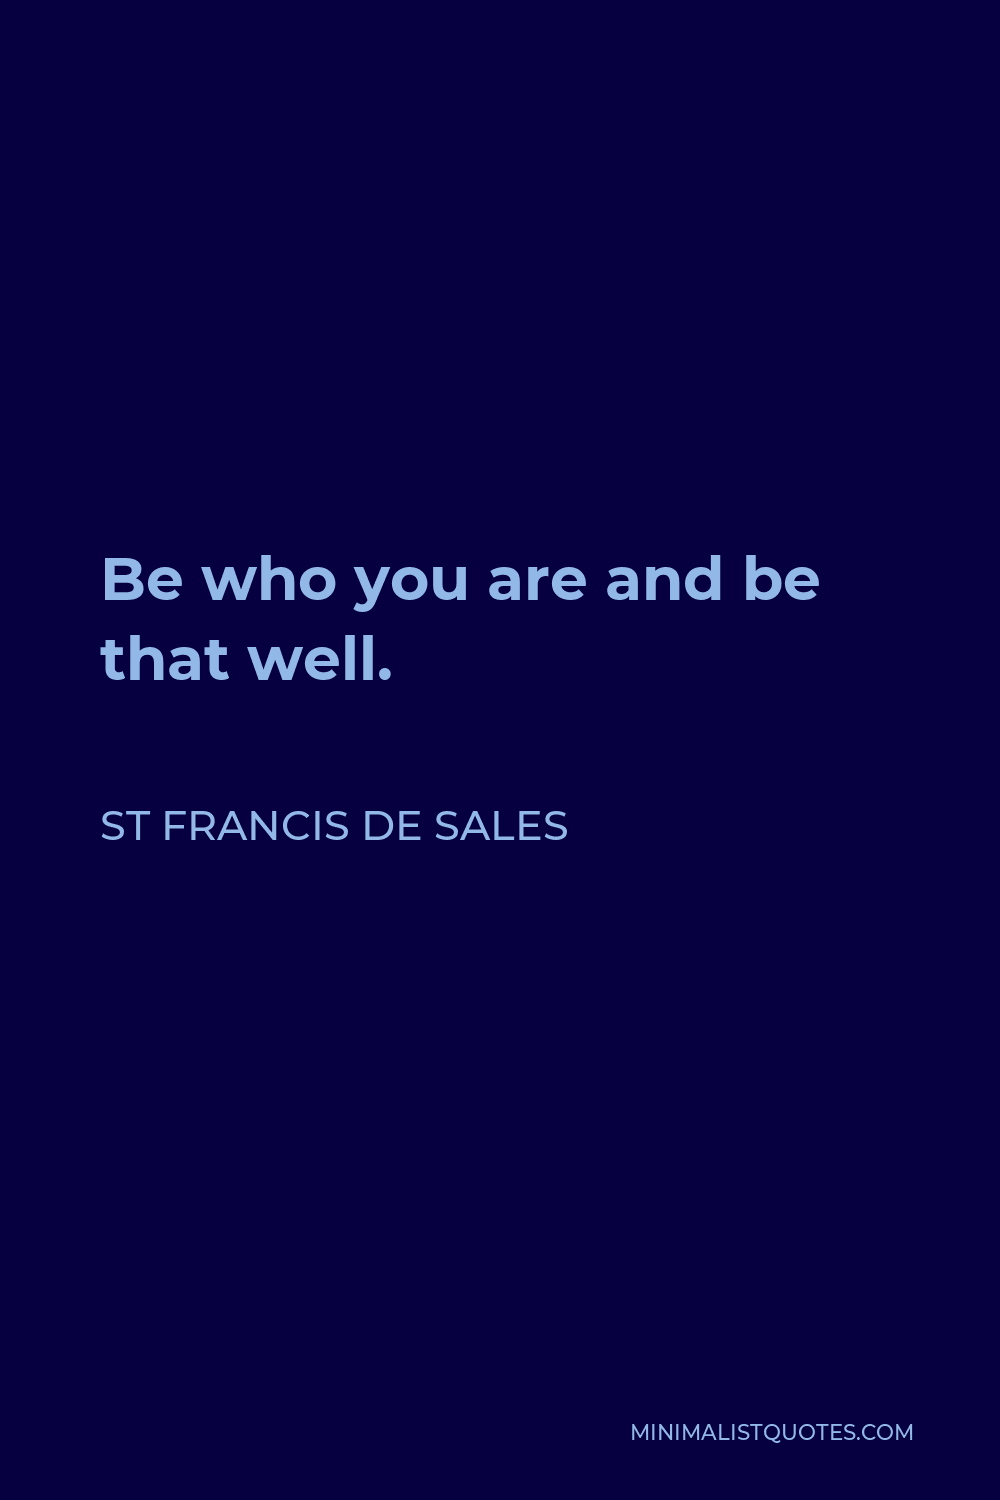 St Francis De Sales Quote - Be who you are and be that well.